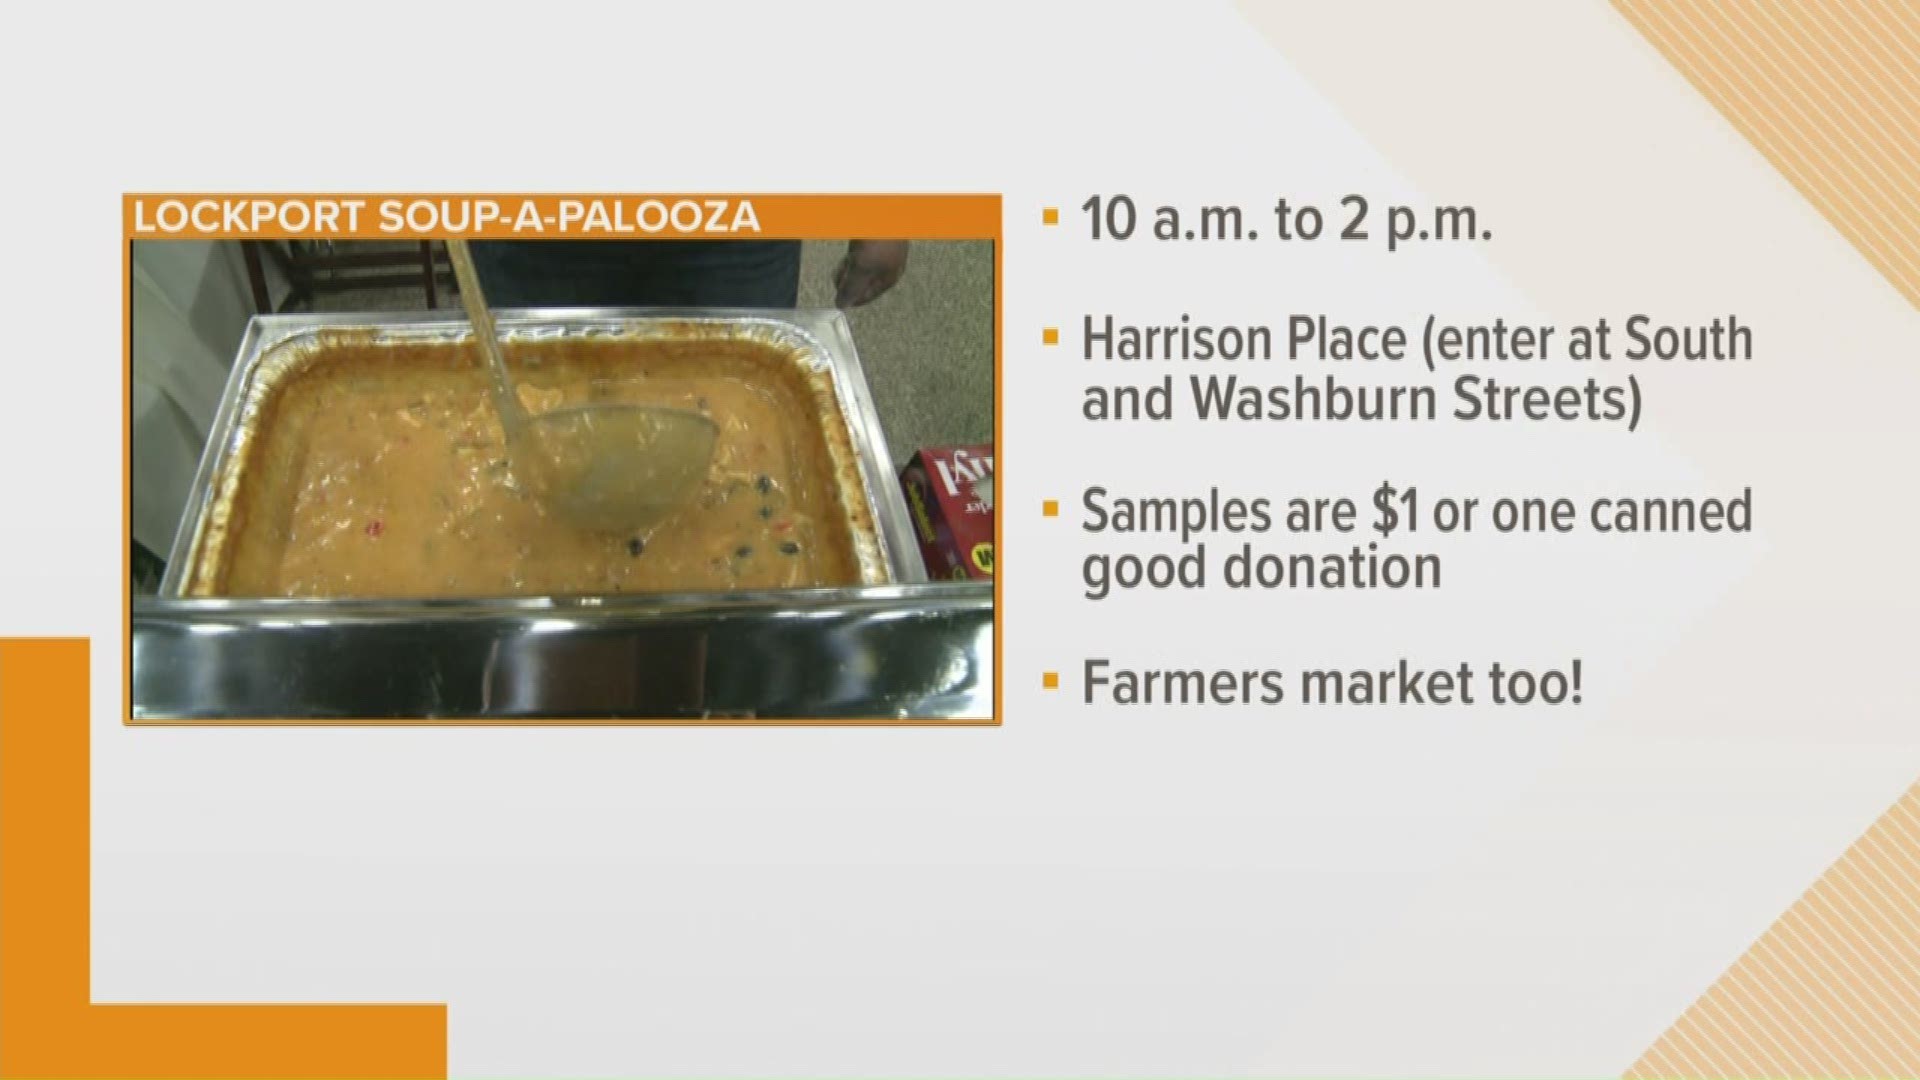 Get your fill of soup samples and help out a good cause at Soup-A-Palooza in Lockport.